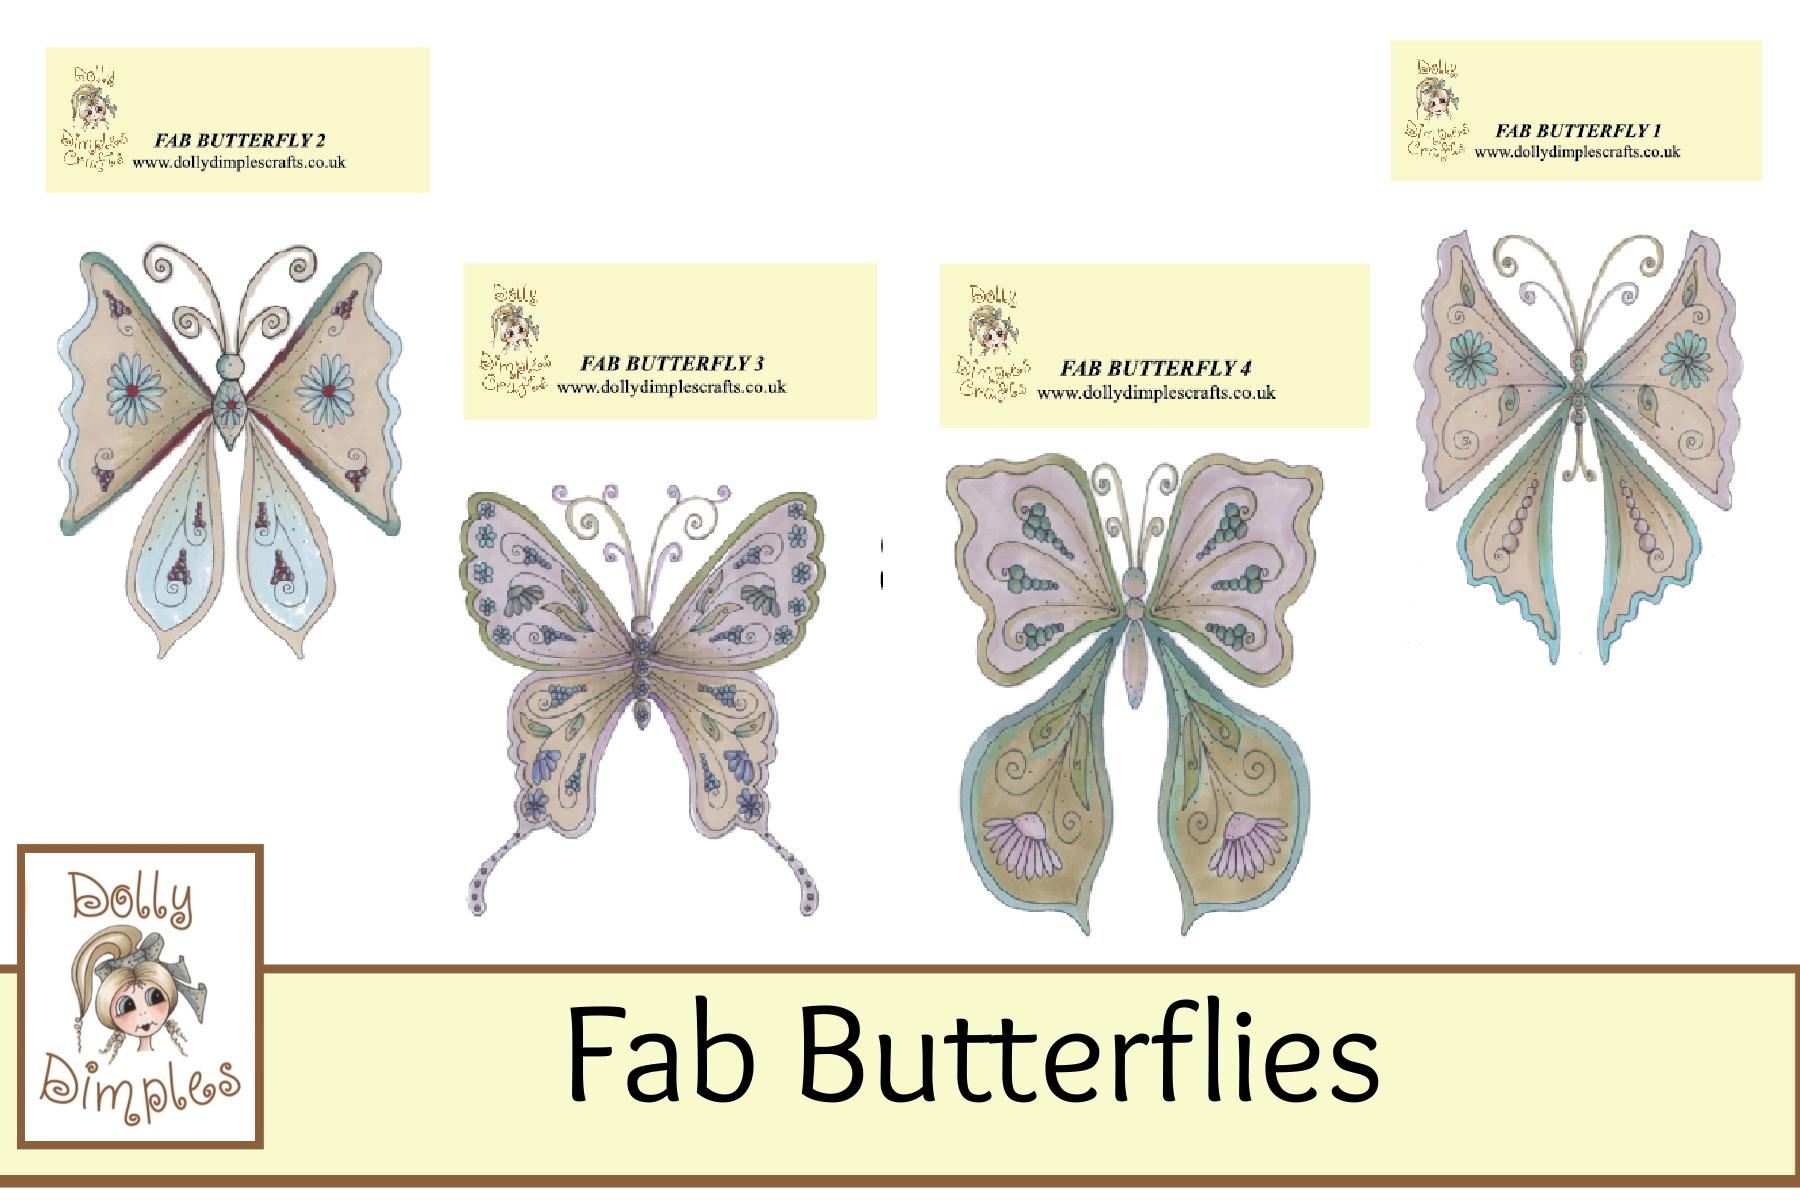 Fabulous Butterfly stamps